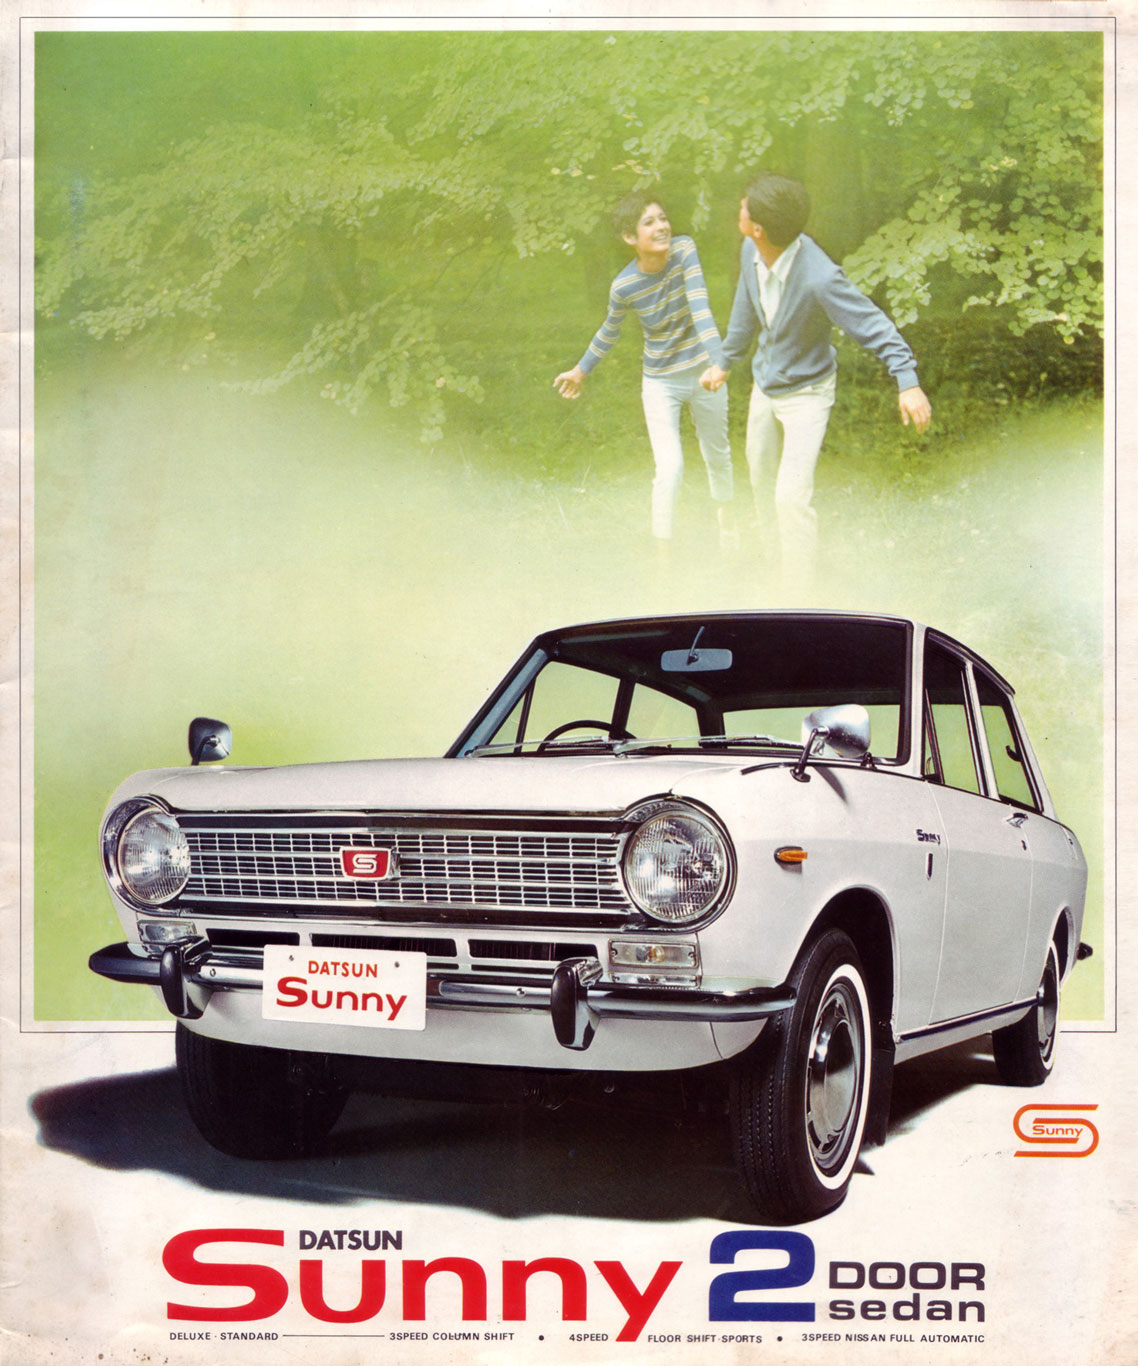 The Top Ten New Cars of 1966